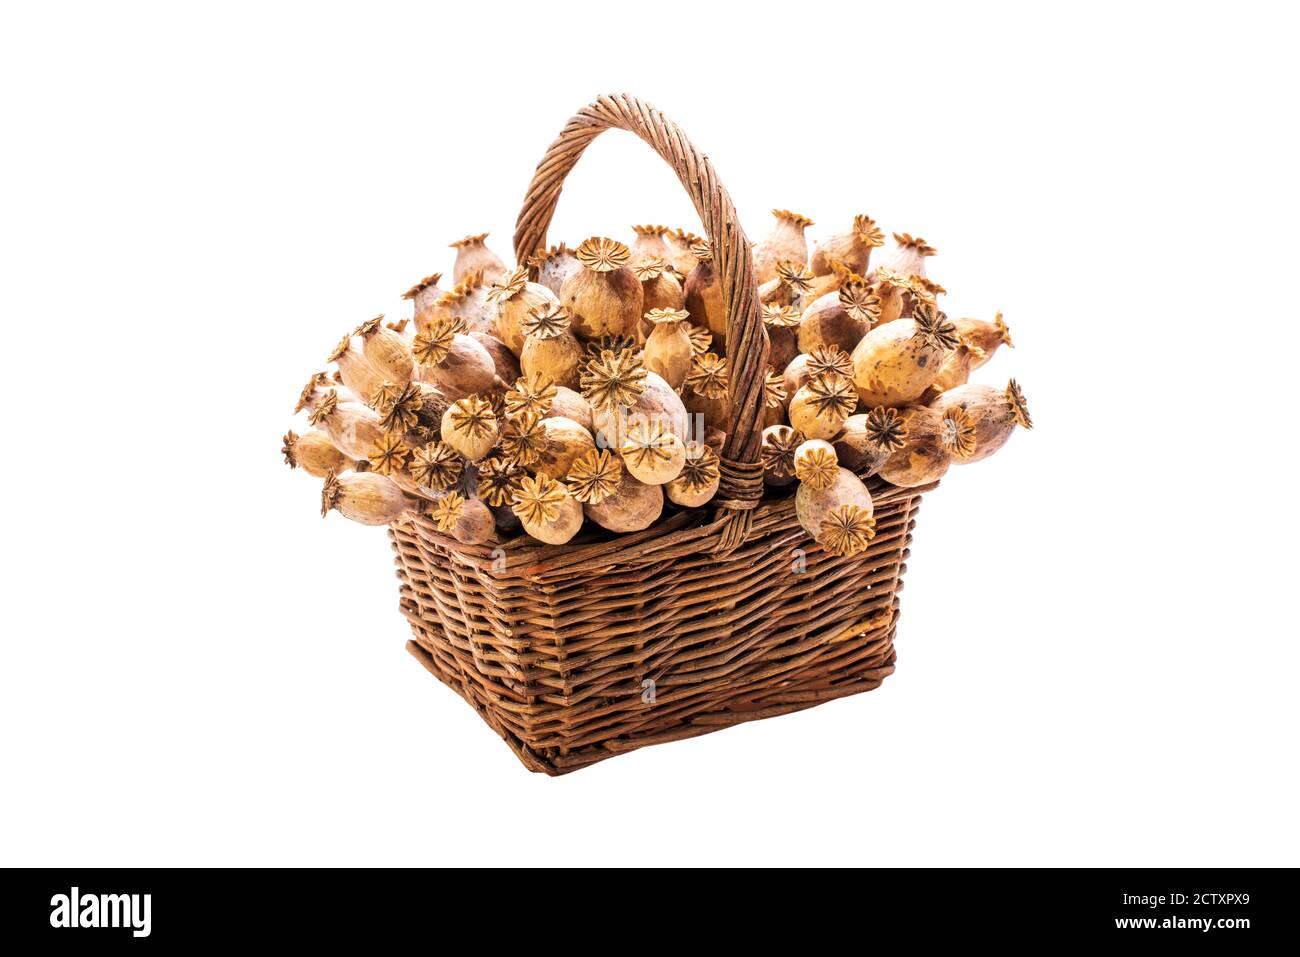 A bunch of dried poppy flower seed pods in a wicker basket isolated on white background. Stock Photo